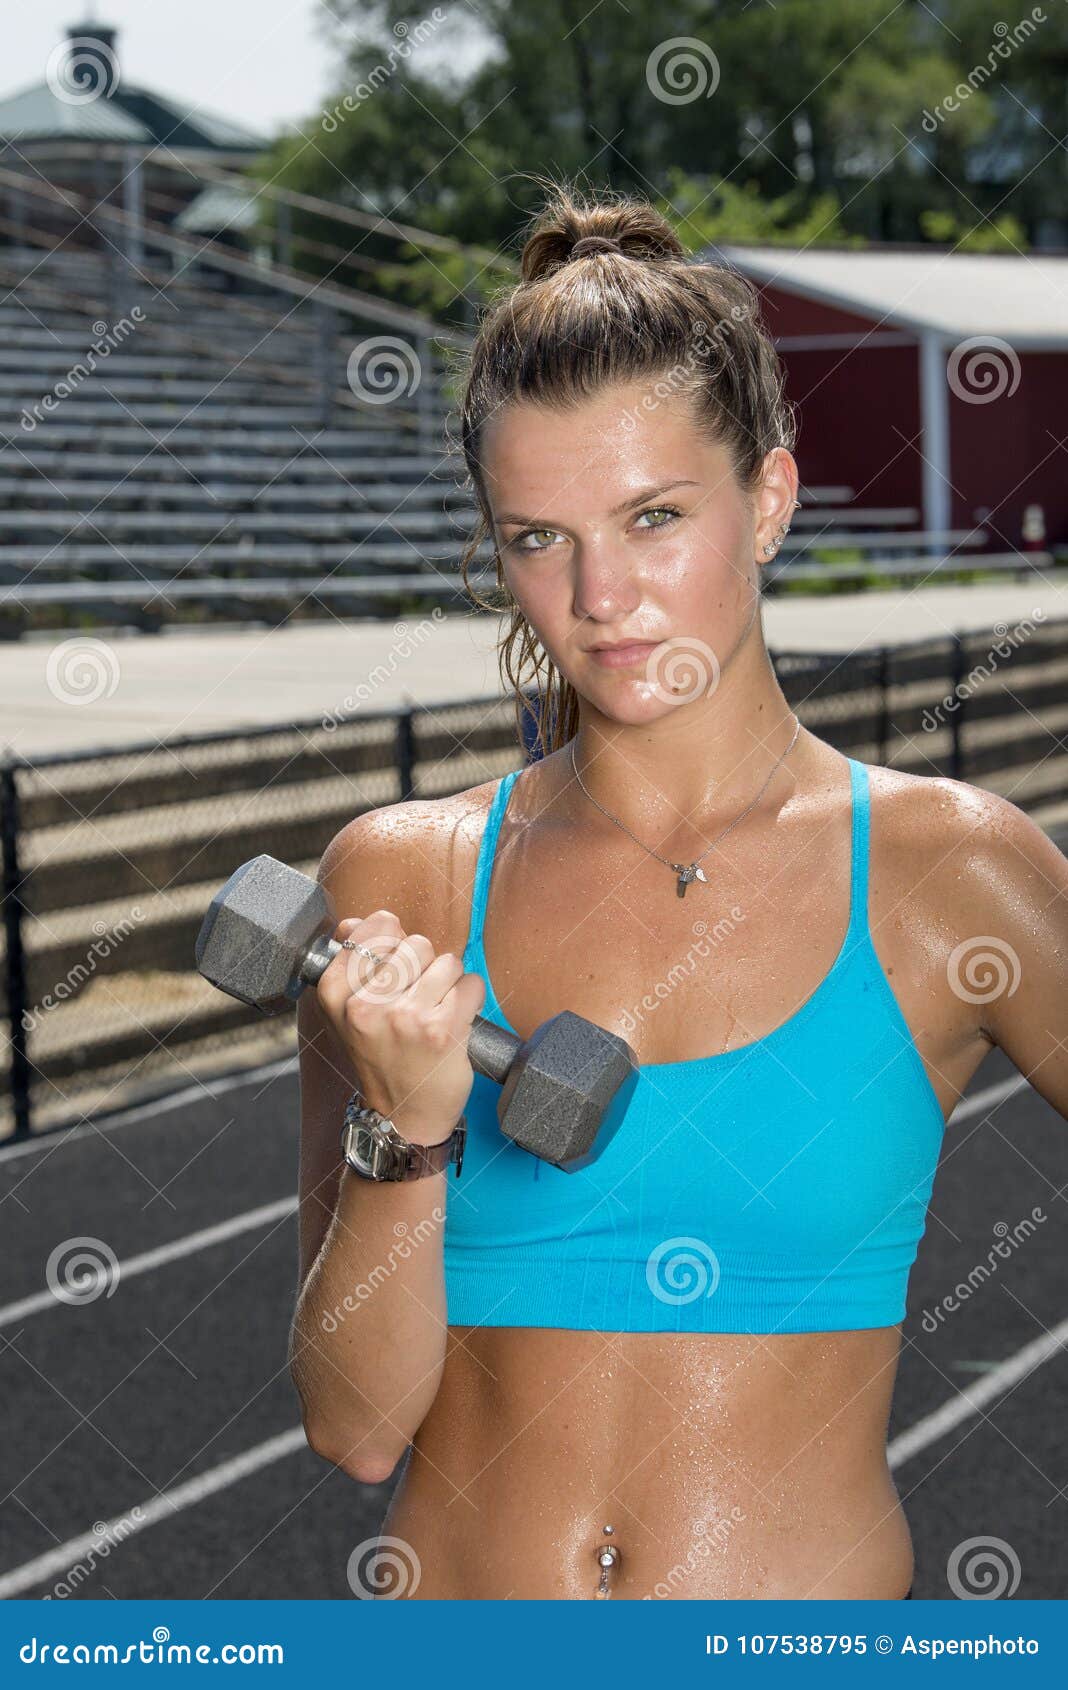 Cute and fit young teen Caucasian girl working out on outdoor track  glistens with sweat in blue sports bra Stock Photo